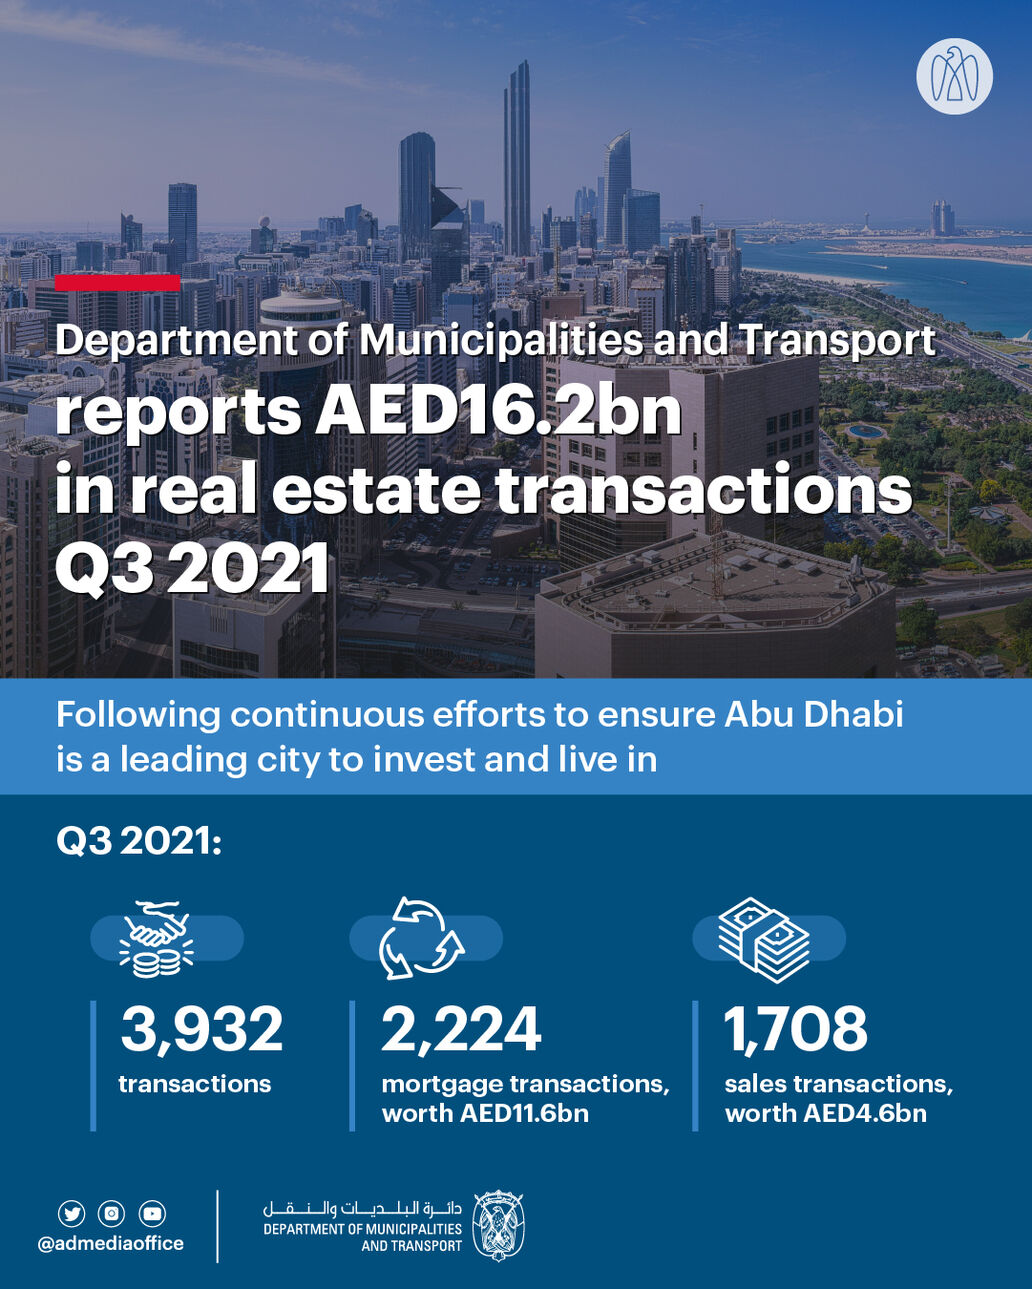 Department of Municipalities and Transport reports AED16.2bn in real estate transactions Q3 2021